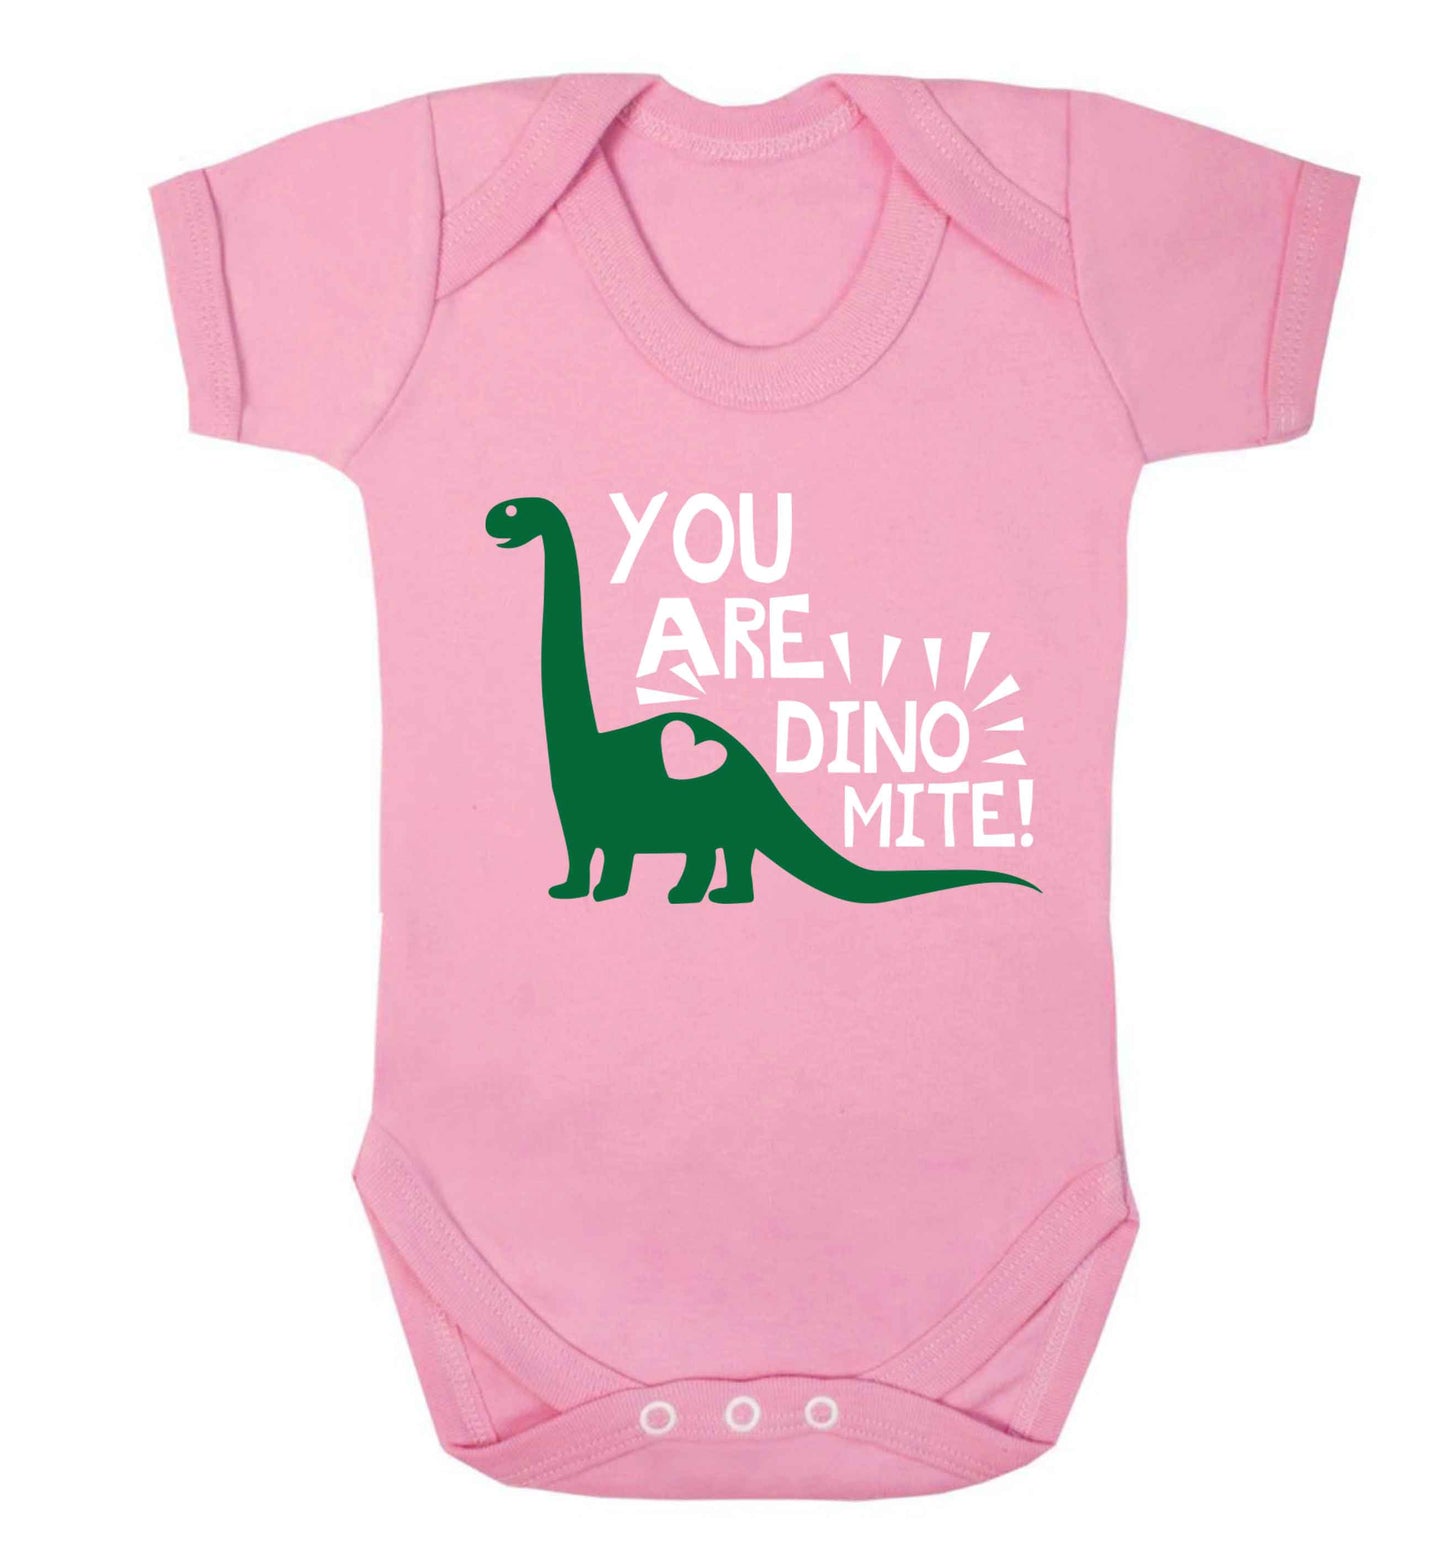 You are dinomite! Baby Vest pale pink 18-24 months